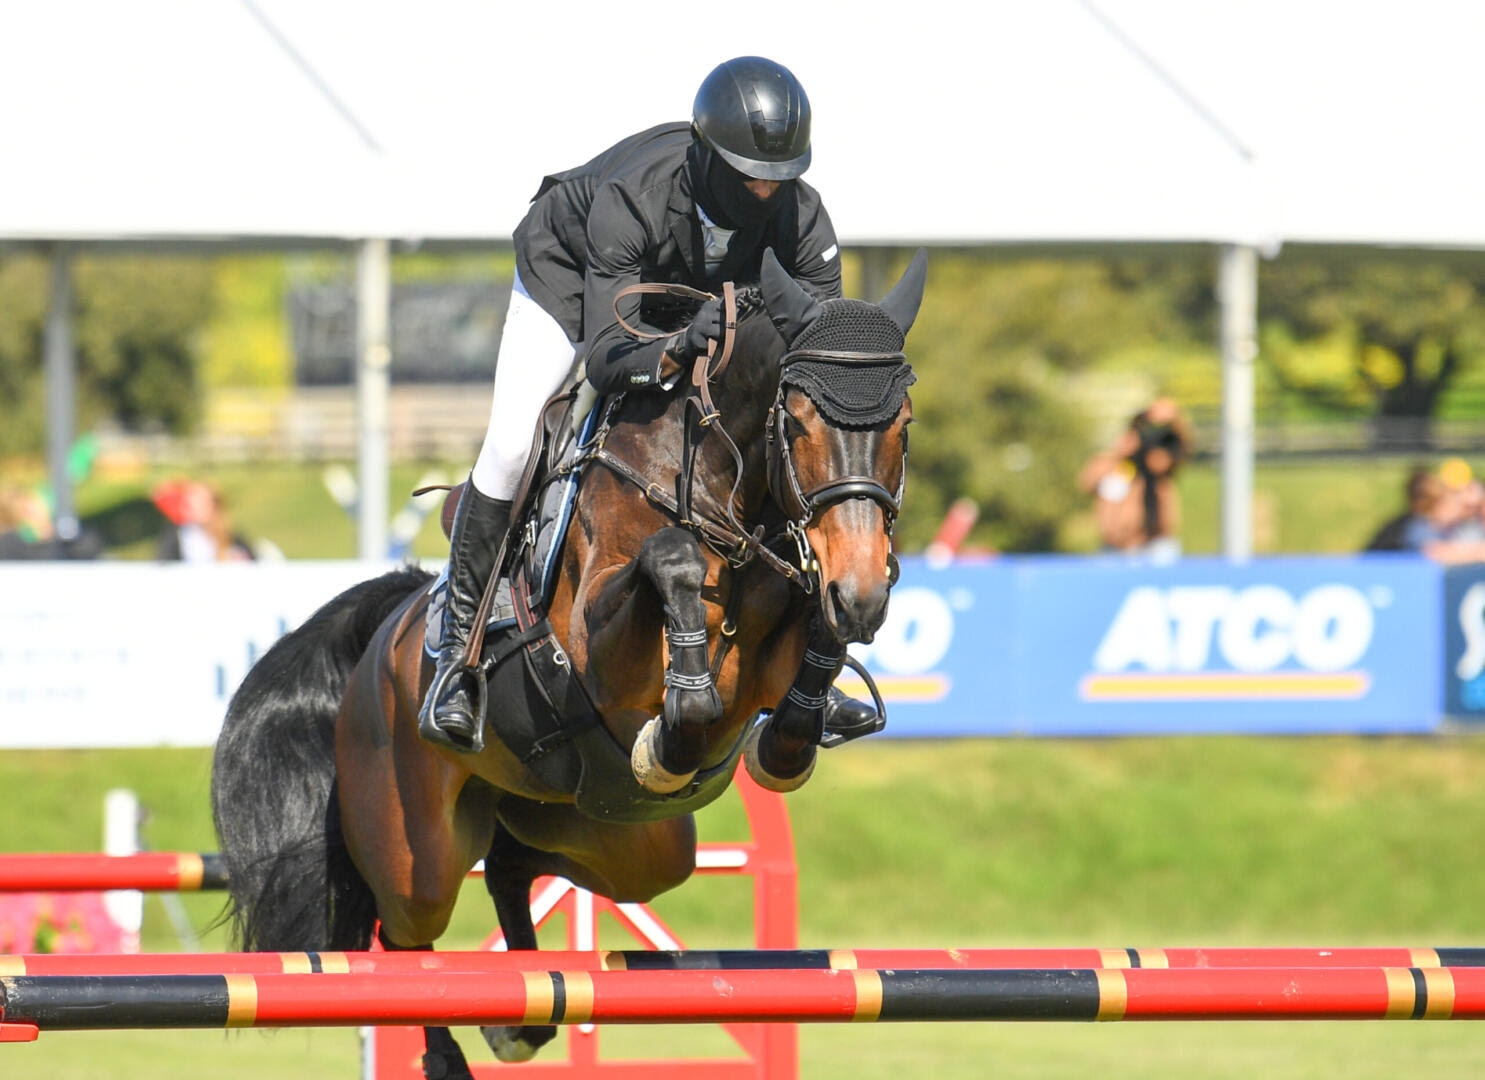 James Chawke Claims Back-to-Back Wins at Blenheim EquiSports. Rivetti winst 2* Grand Prix!